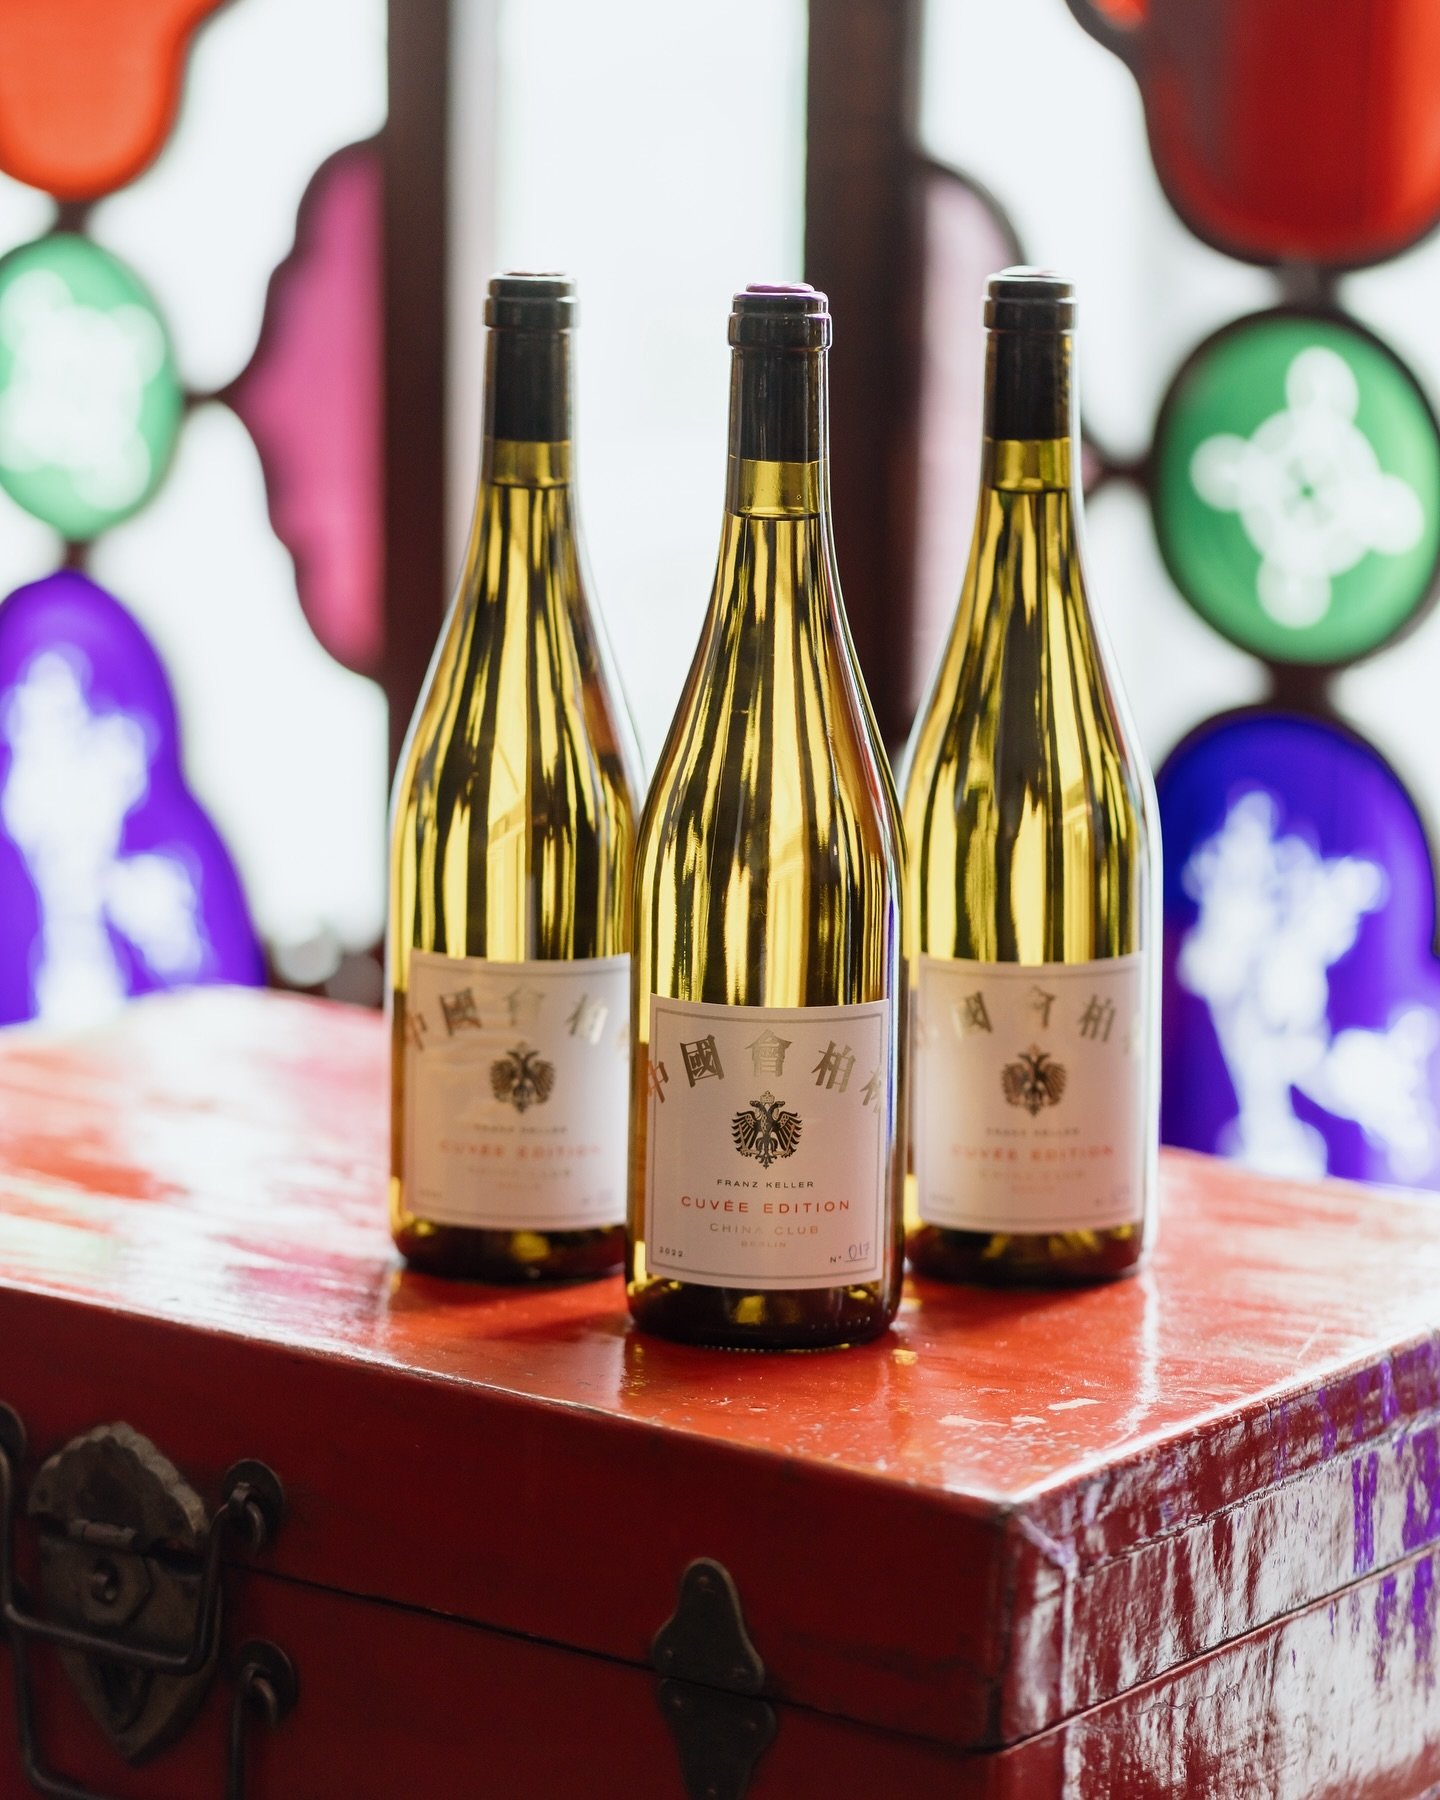 Following our signature red wine and champagne edition, we are delighted to present our first white wine, the exclusive China Club Berlin Cuv&eacute;e, which was created with the renowned Franz Keller winery from Baden.

The white wine, vintage 2022,